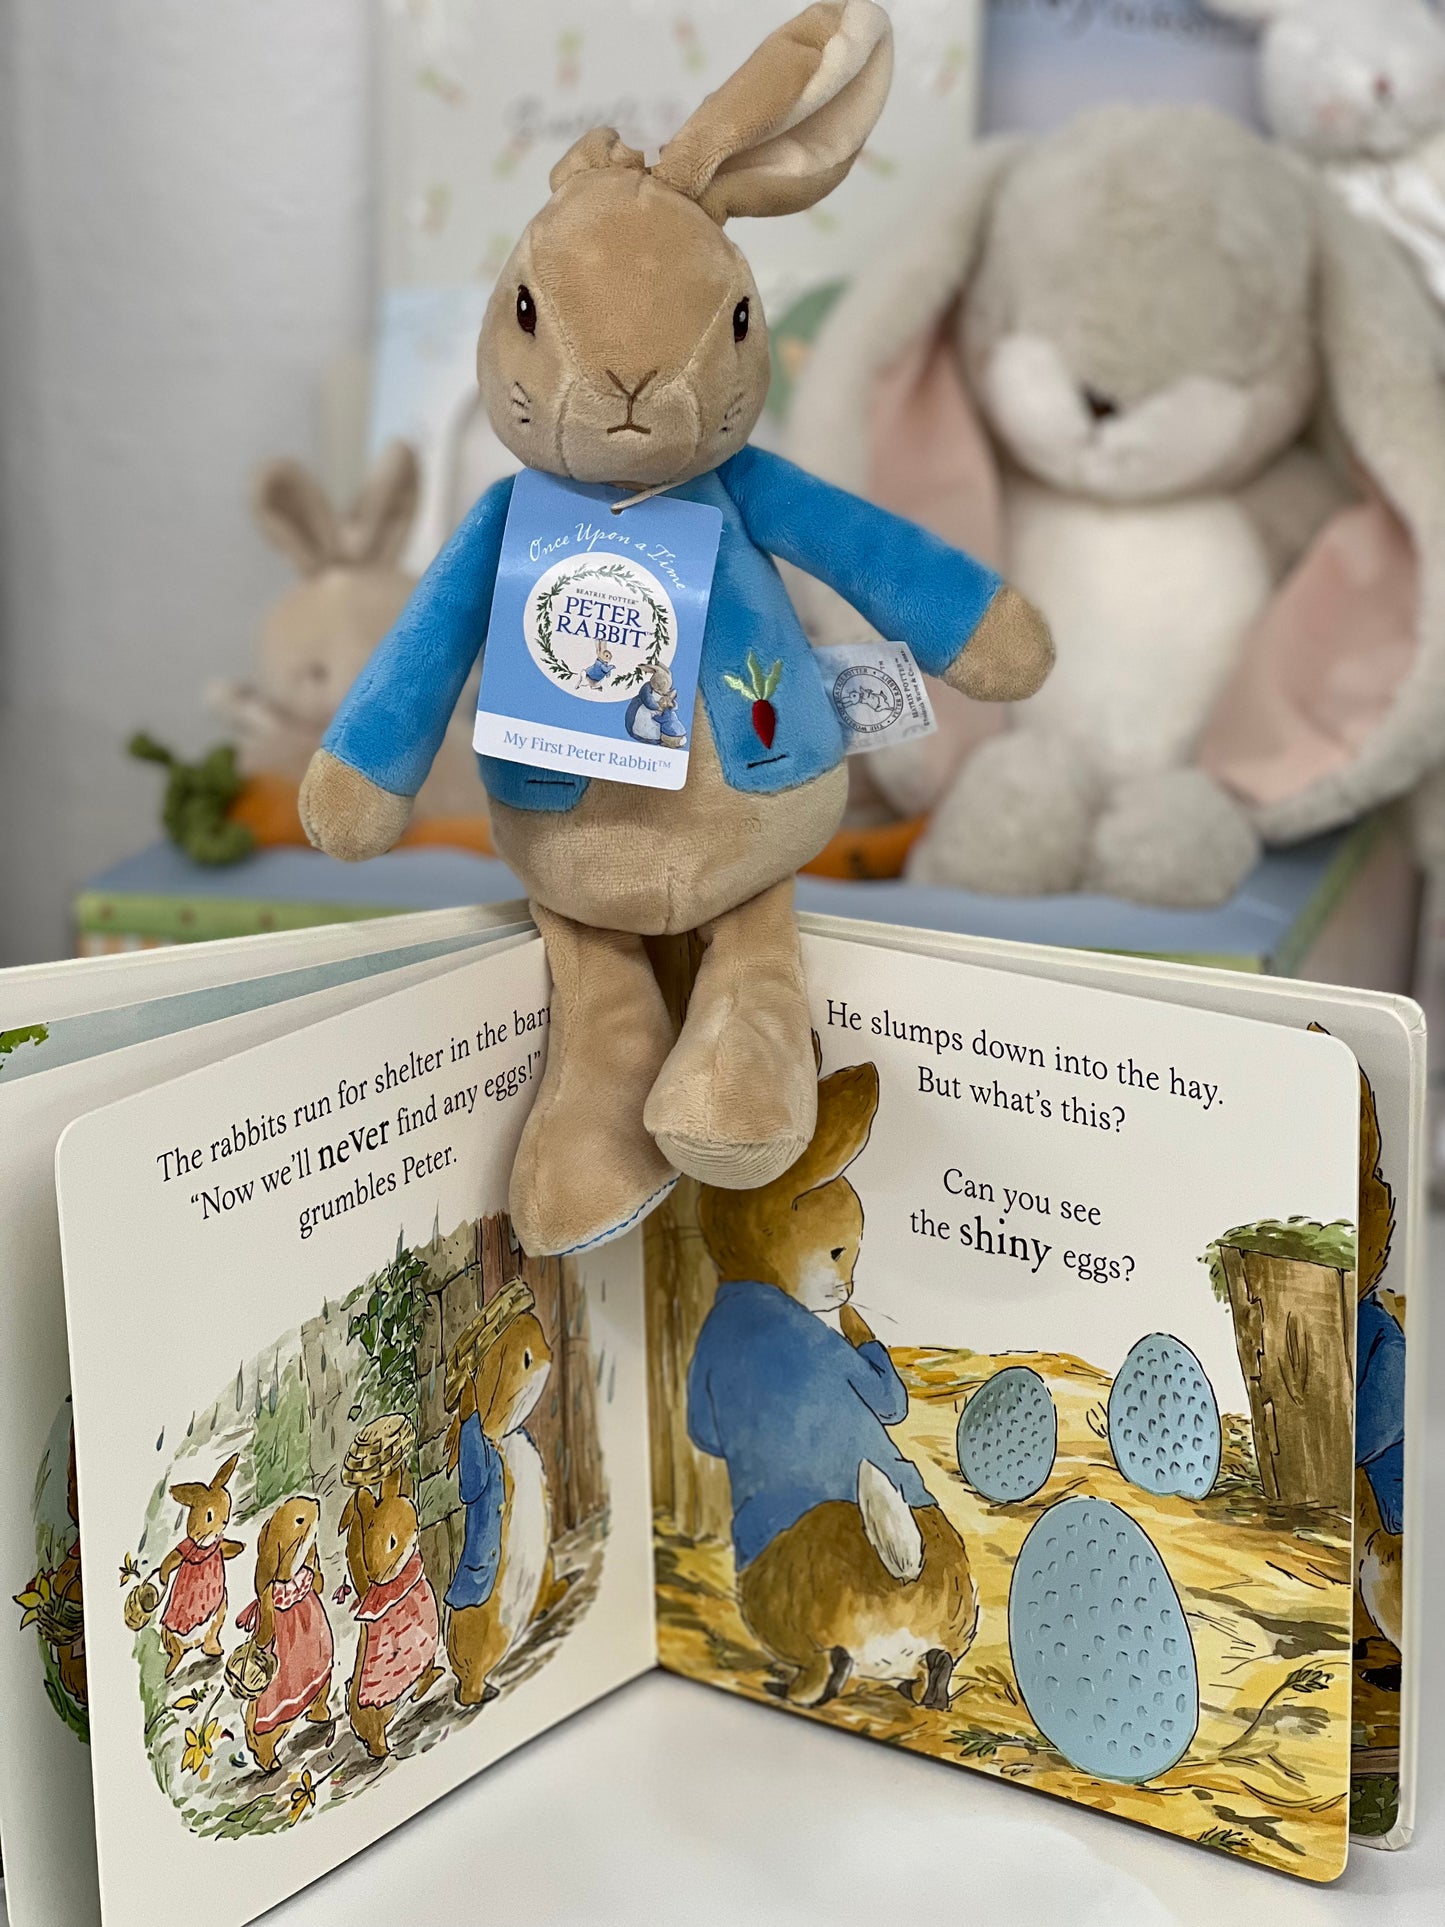 Peter Rabbit A Fluffy Easter Tail Interactive Board Book